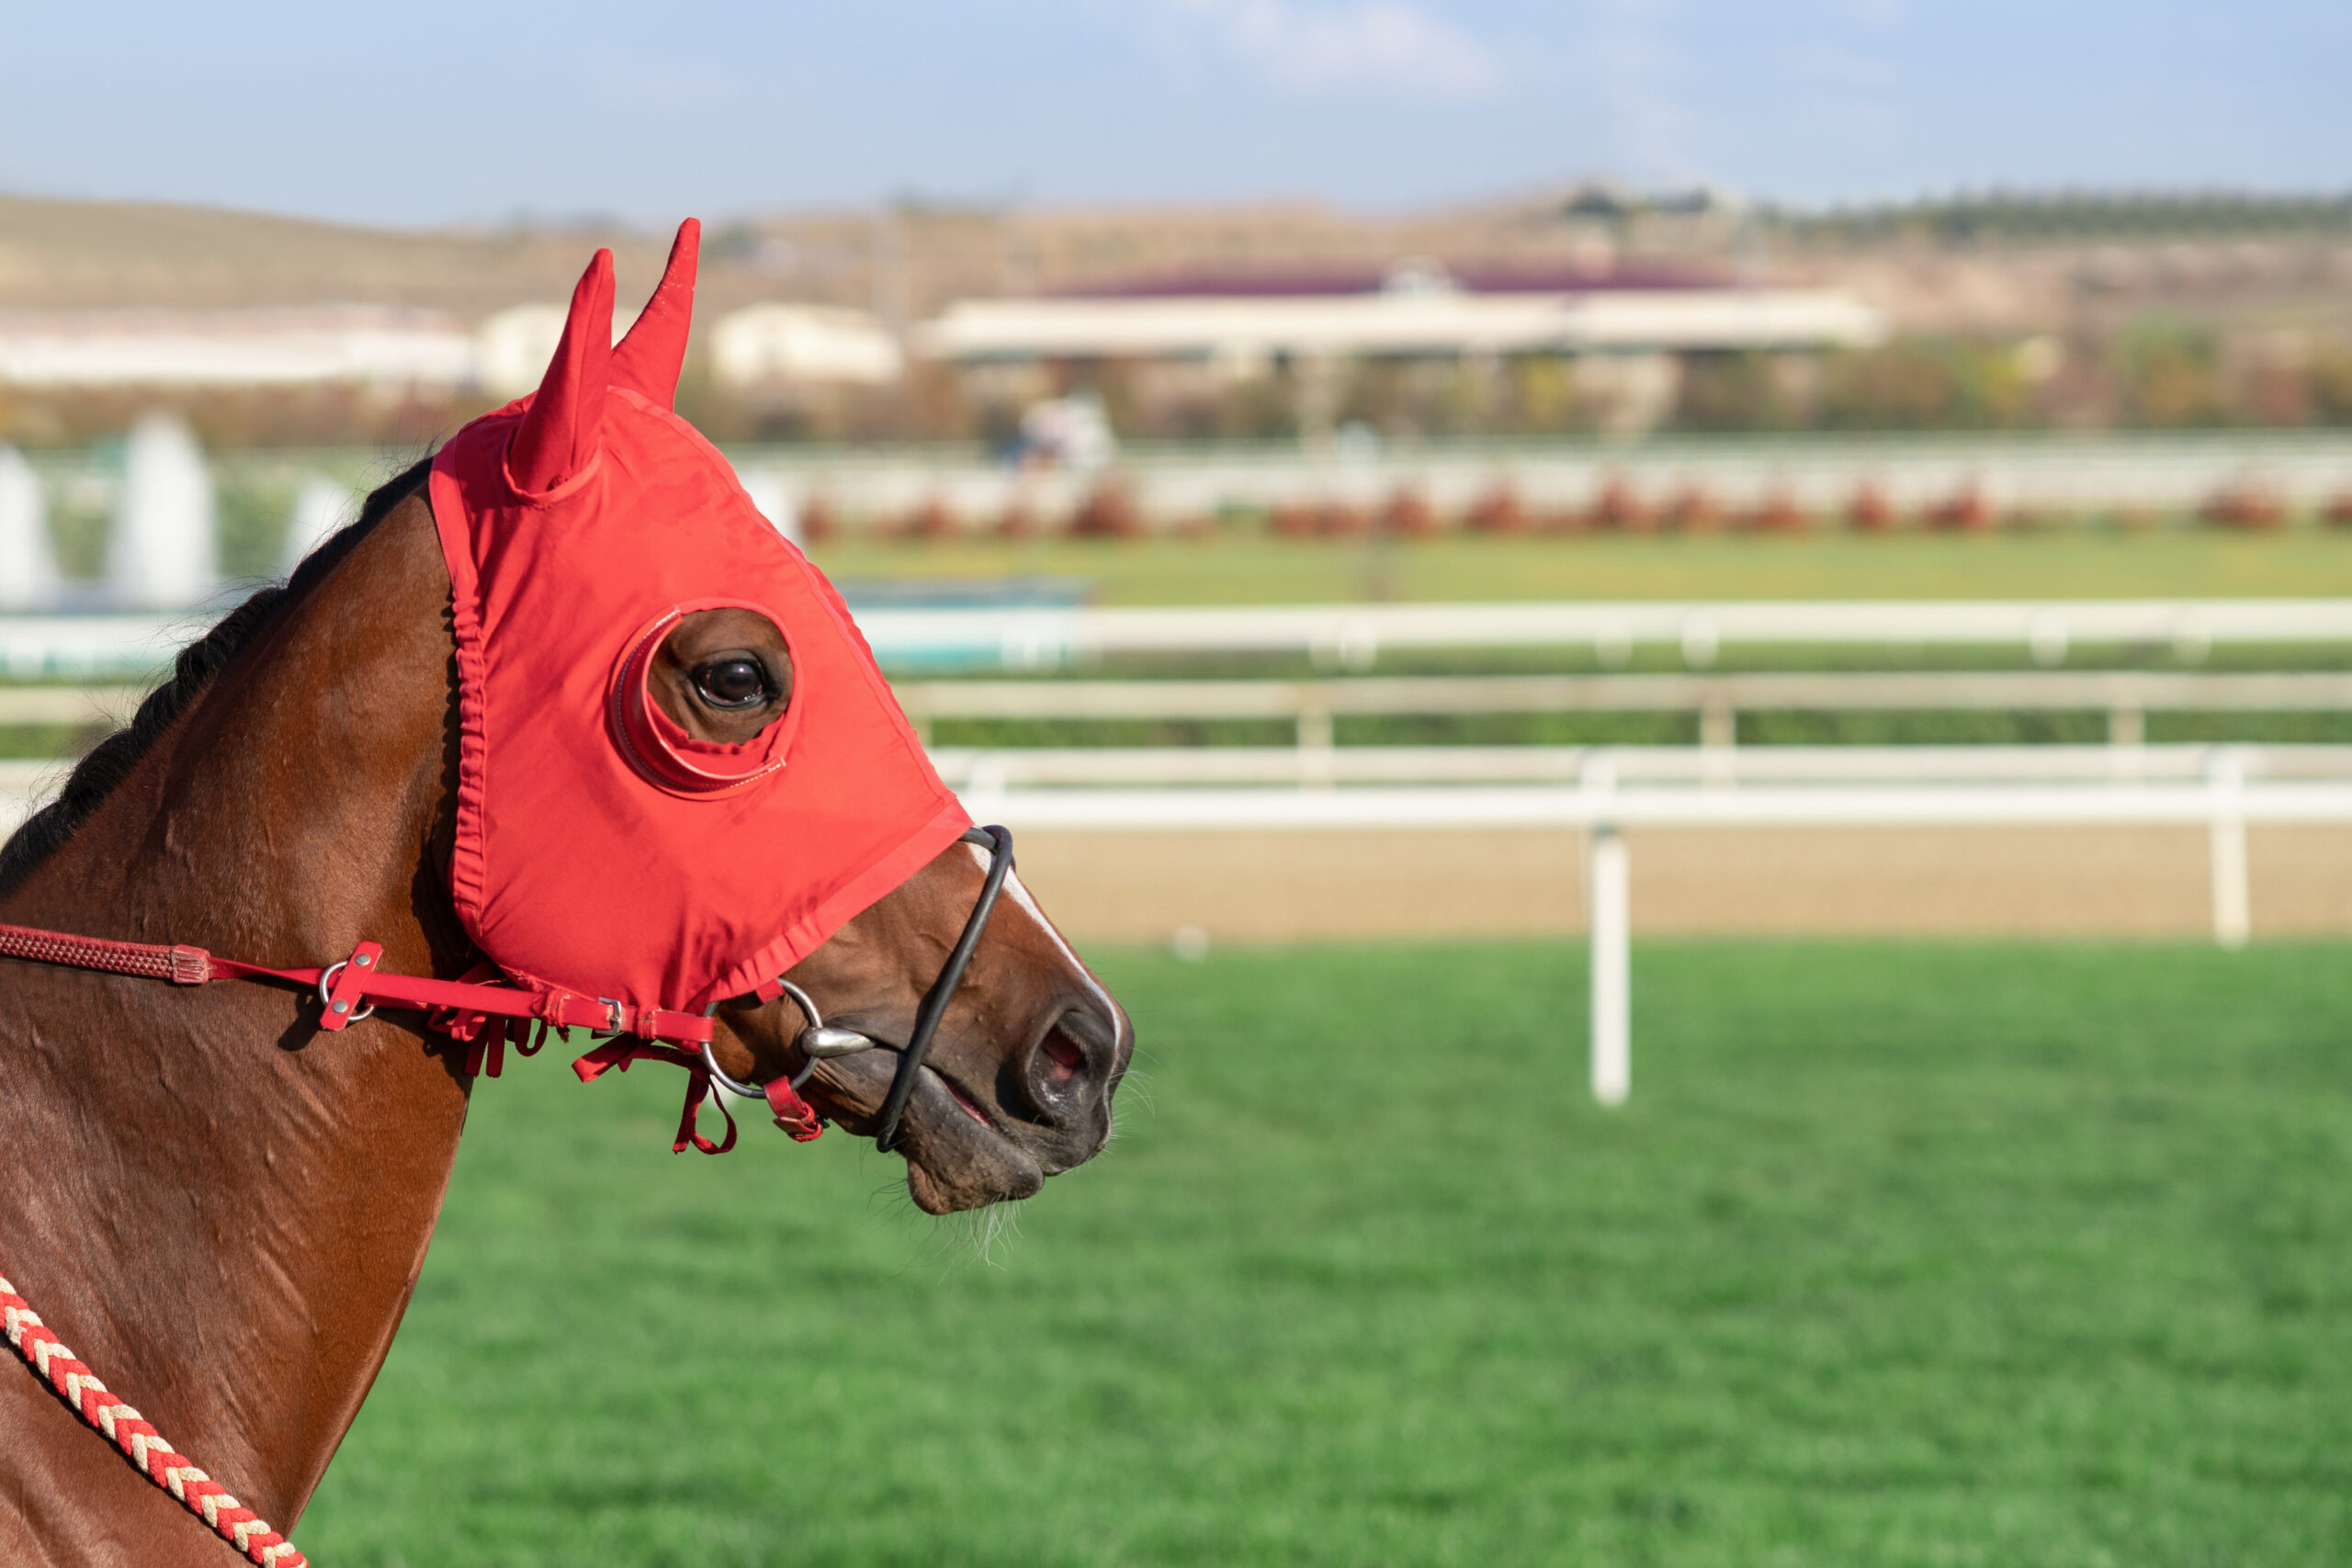 The Kentucky Derby's clever TikTok strategy has lessons for PR pros.